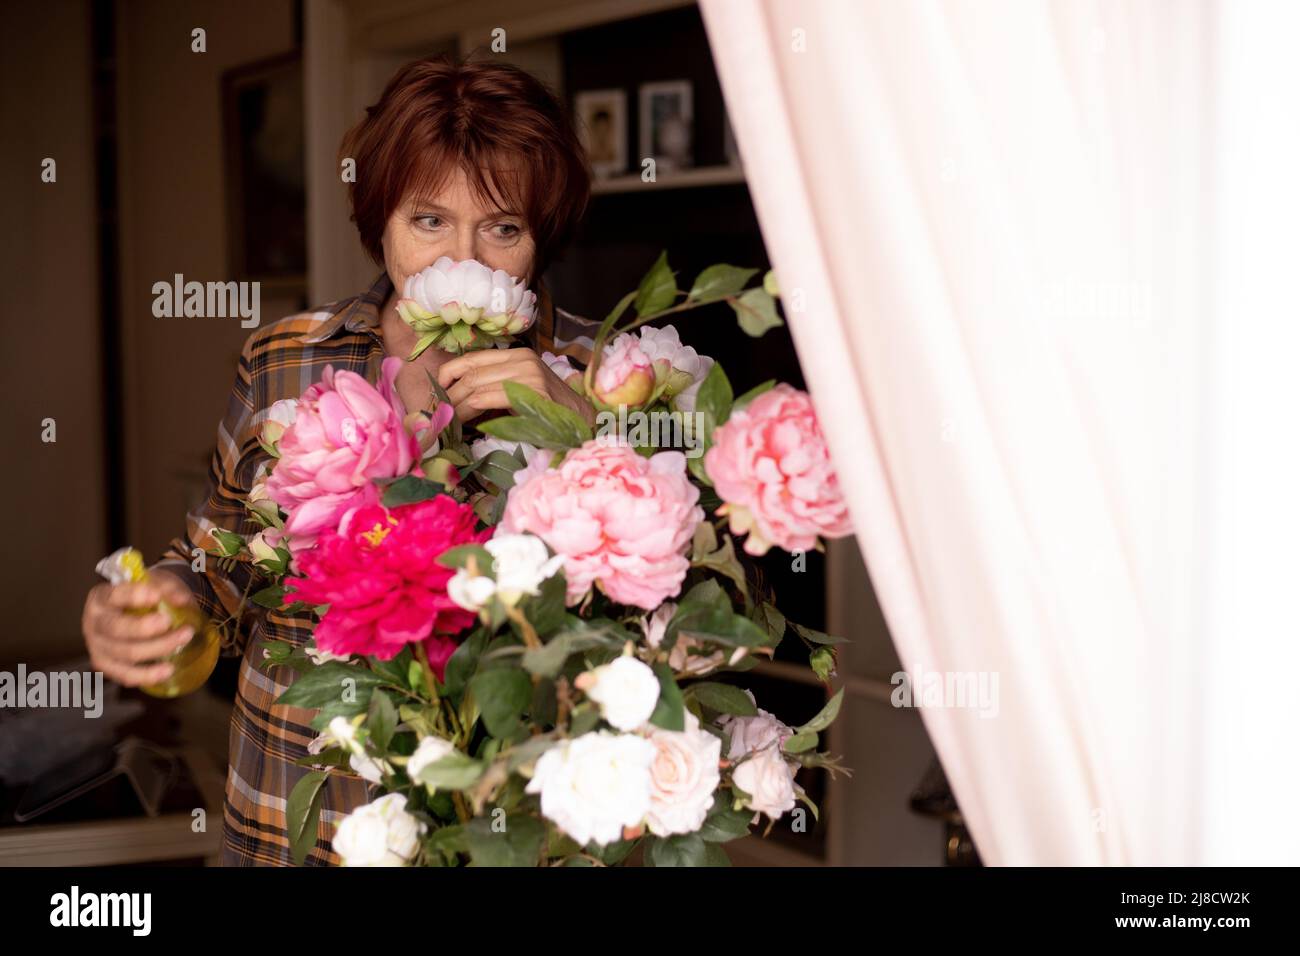 Mature woman sniff fragrance of fresh blooming pink and white garden roses and spray green leaves with water in home room. Housewife take care of Stock Photo